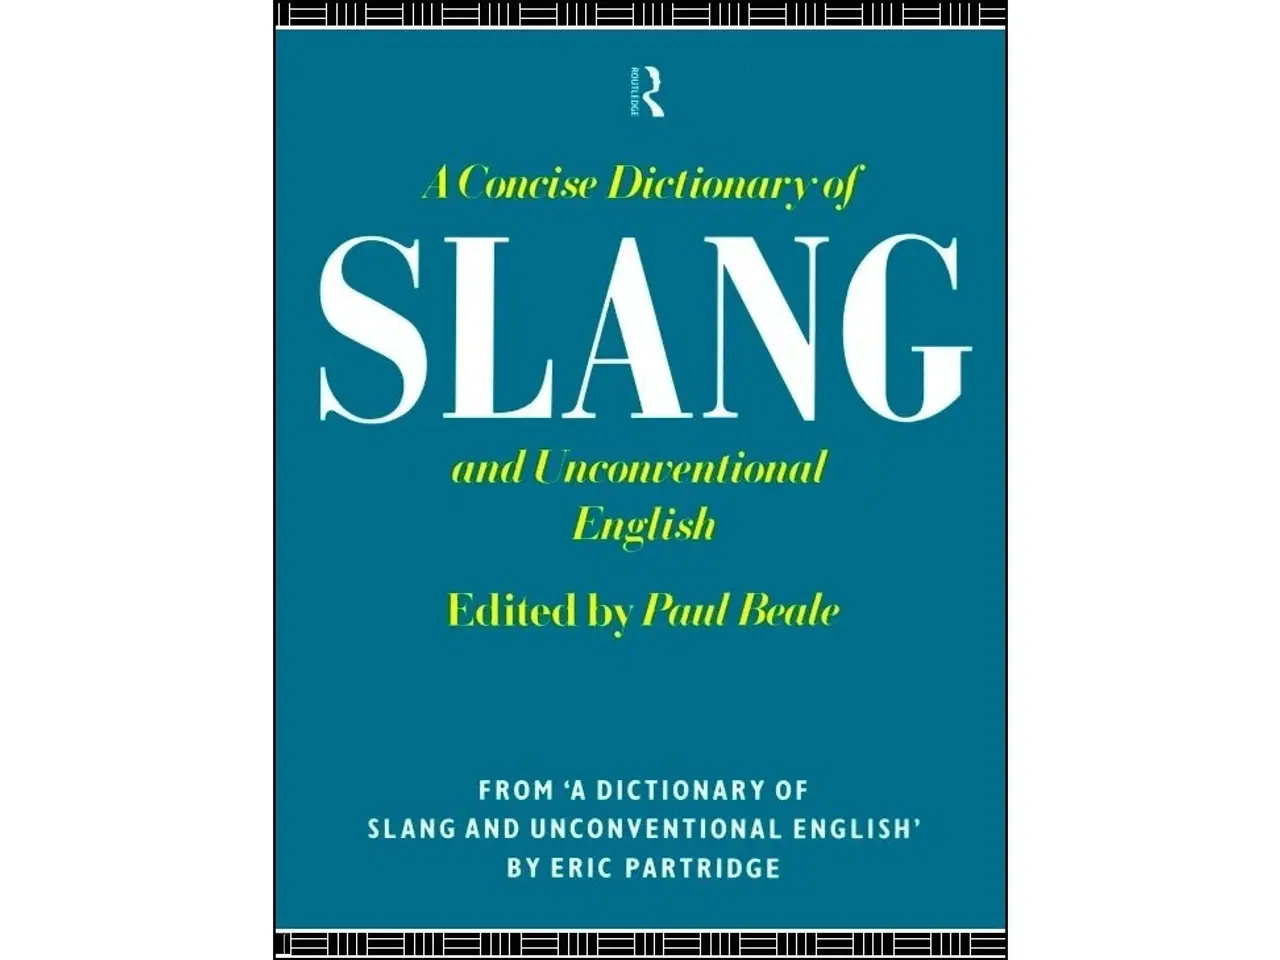 Billede 1 - A Concise Dictionary of Slang